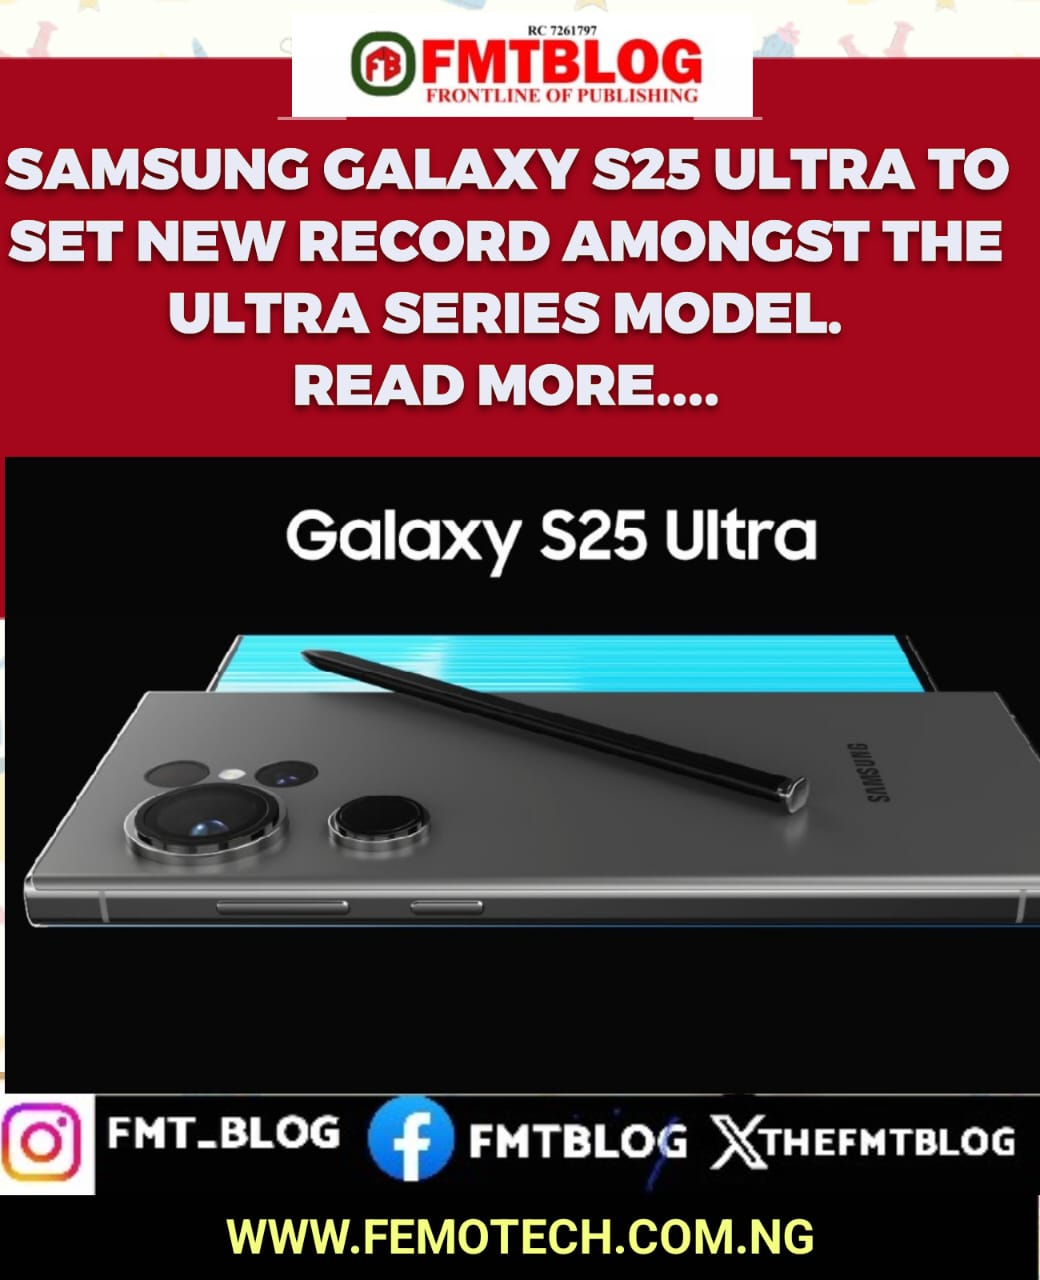 Samsung Galaxy S25 Ultra To Set New Record Amongst The Ultra S Series Model